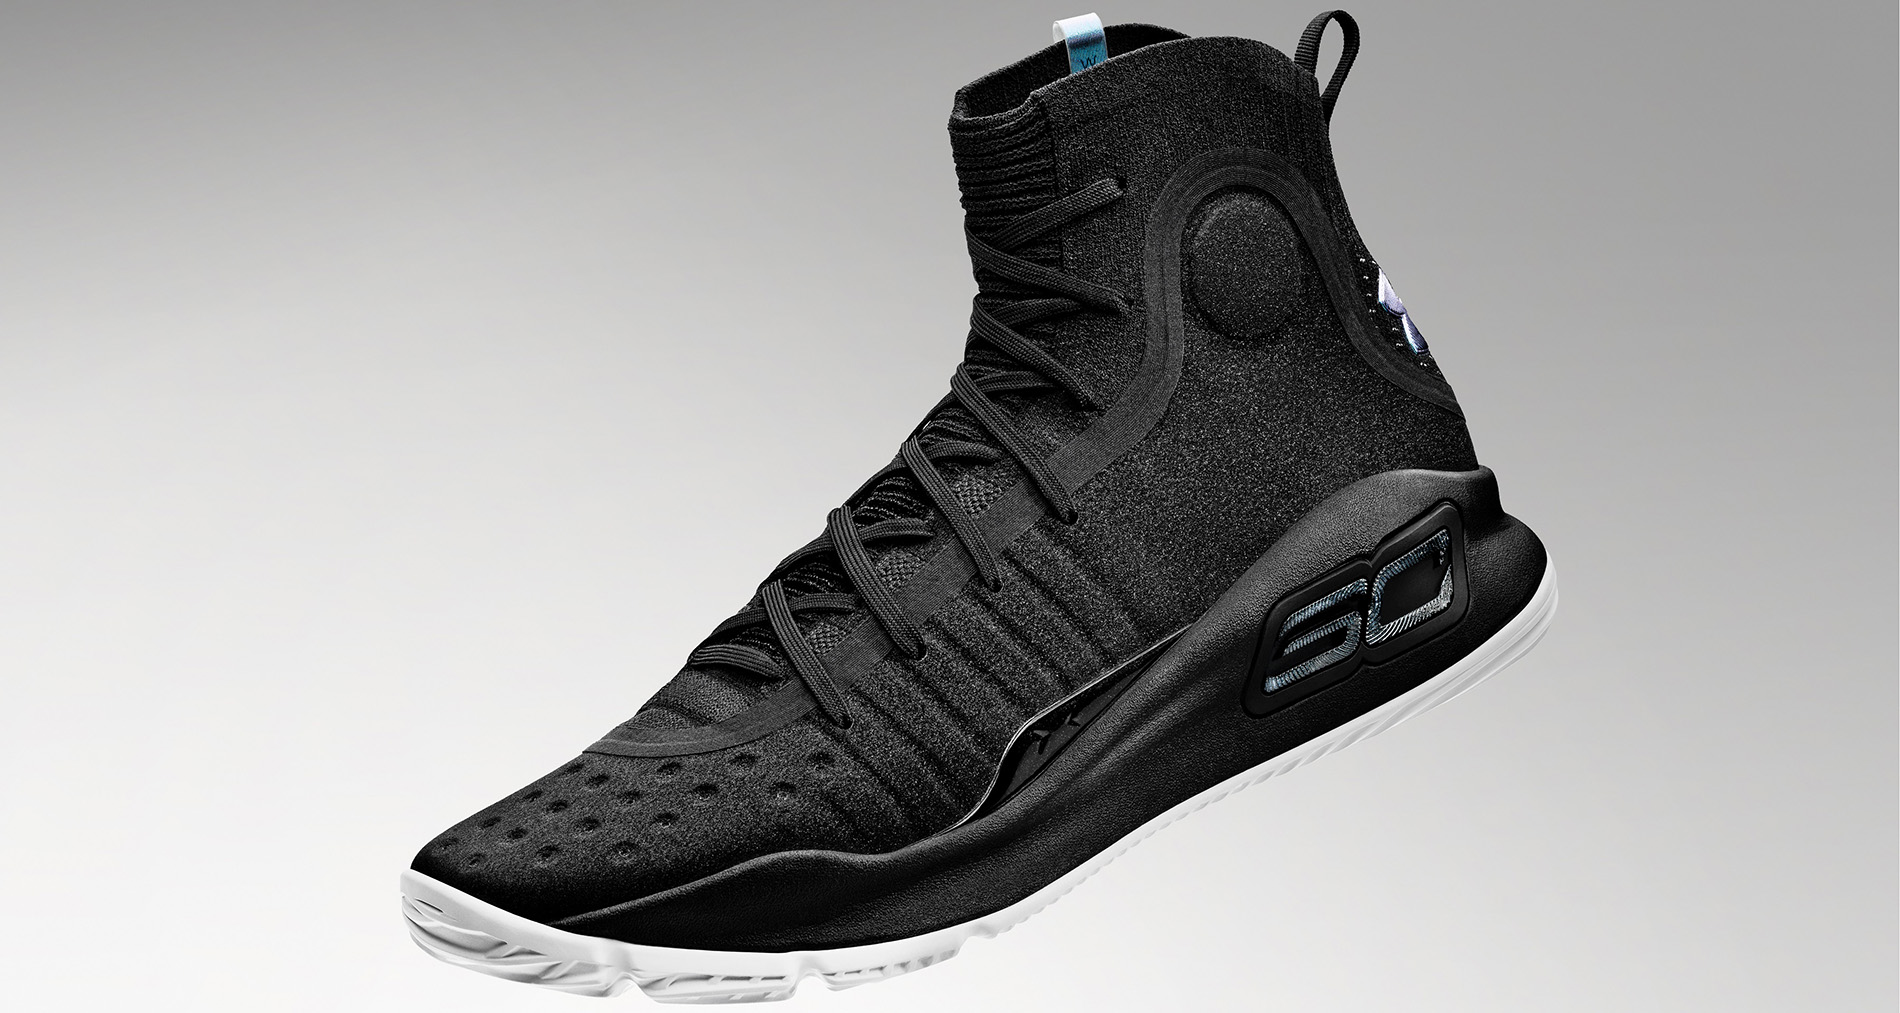 Under Armour Curry 4 Goes All-Black 